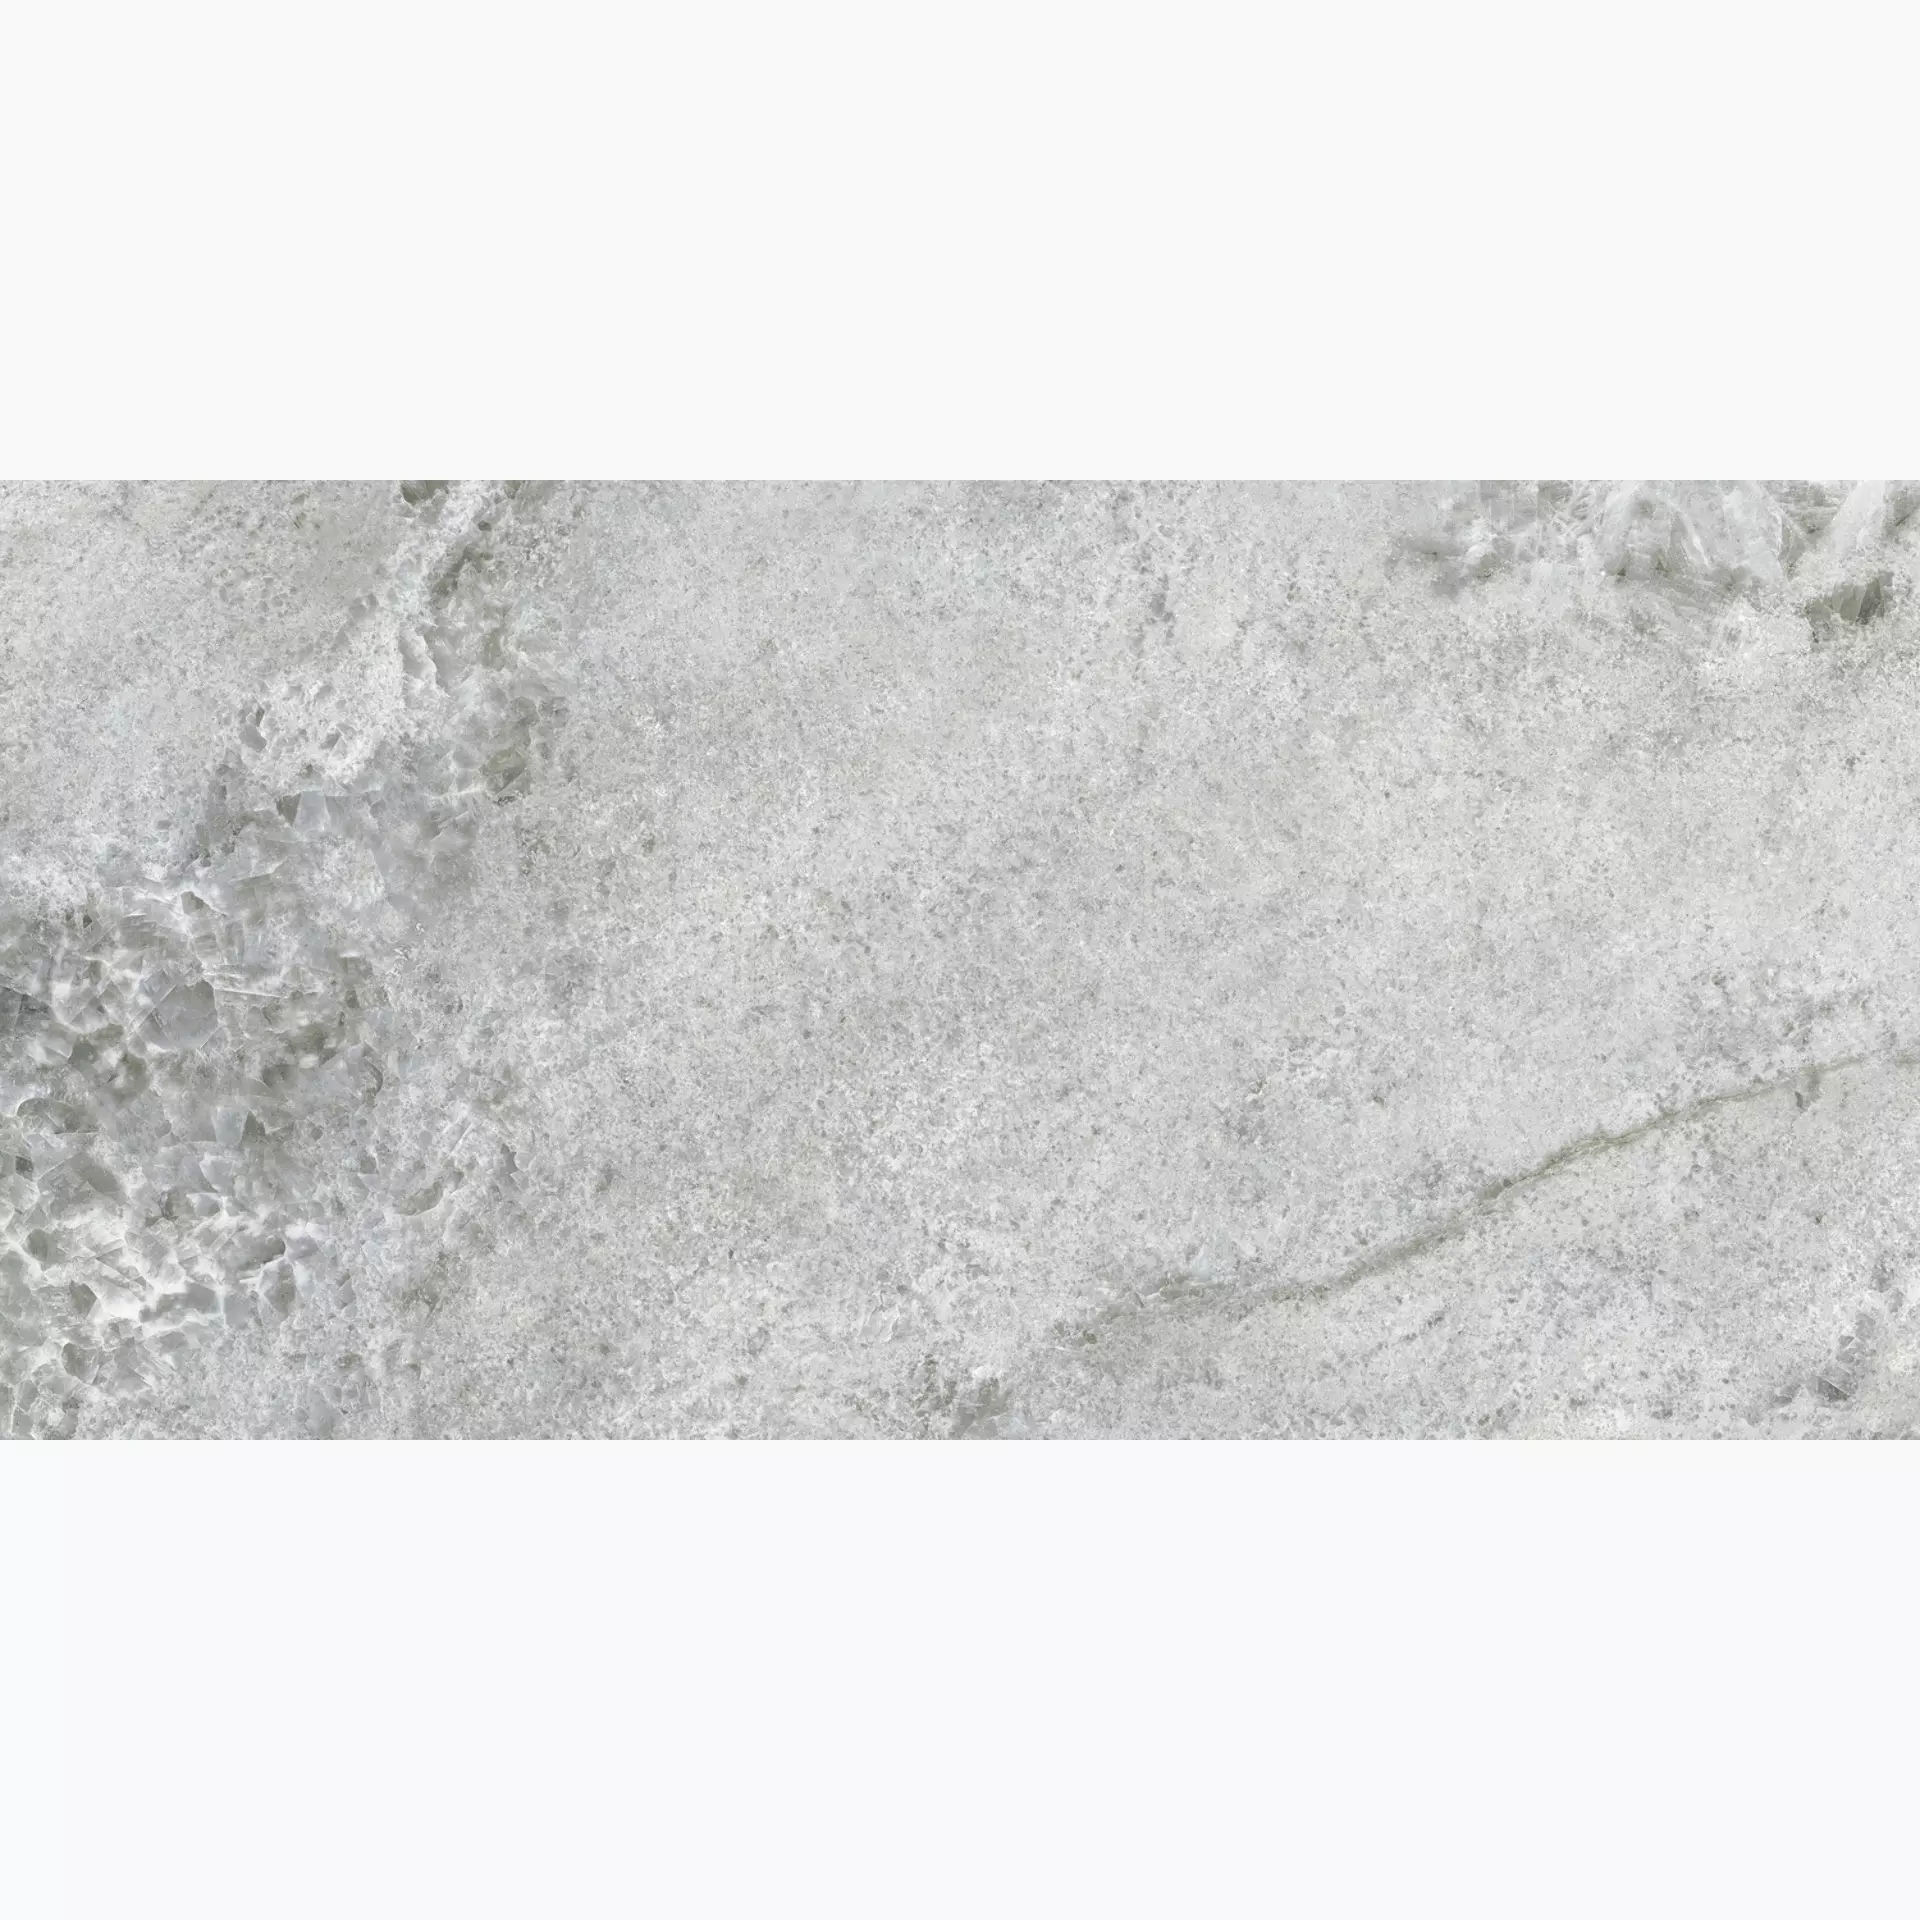 Ariostea Ultra Crystal Grey Lucidato Shiny UCR6L157608 75x150cm rectified 6mm